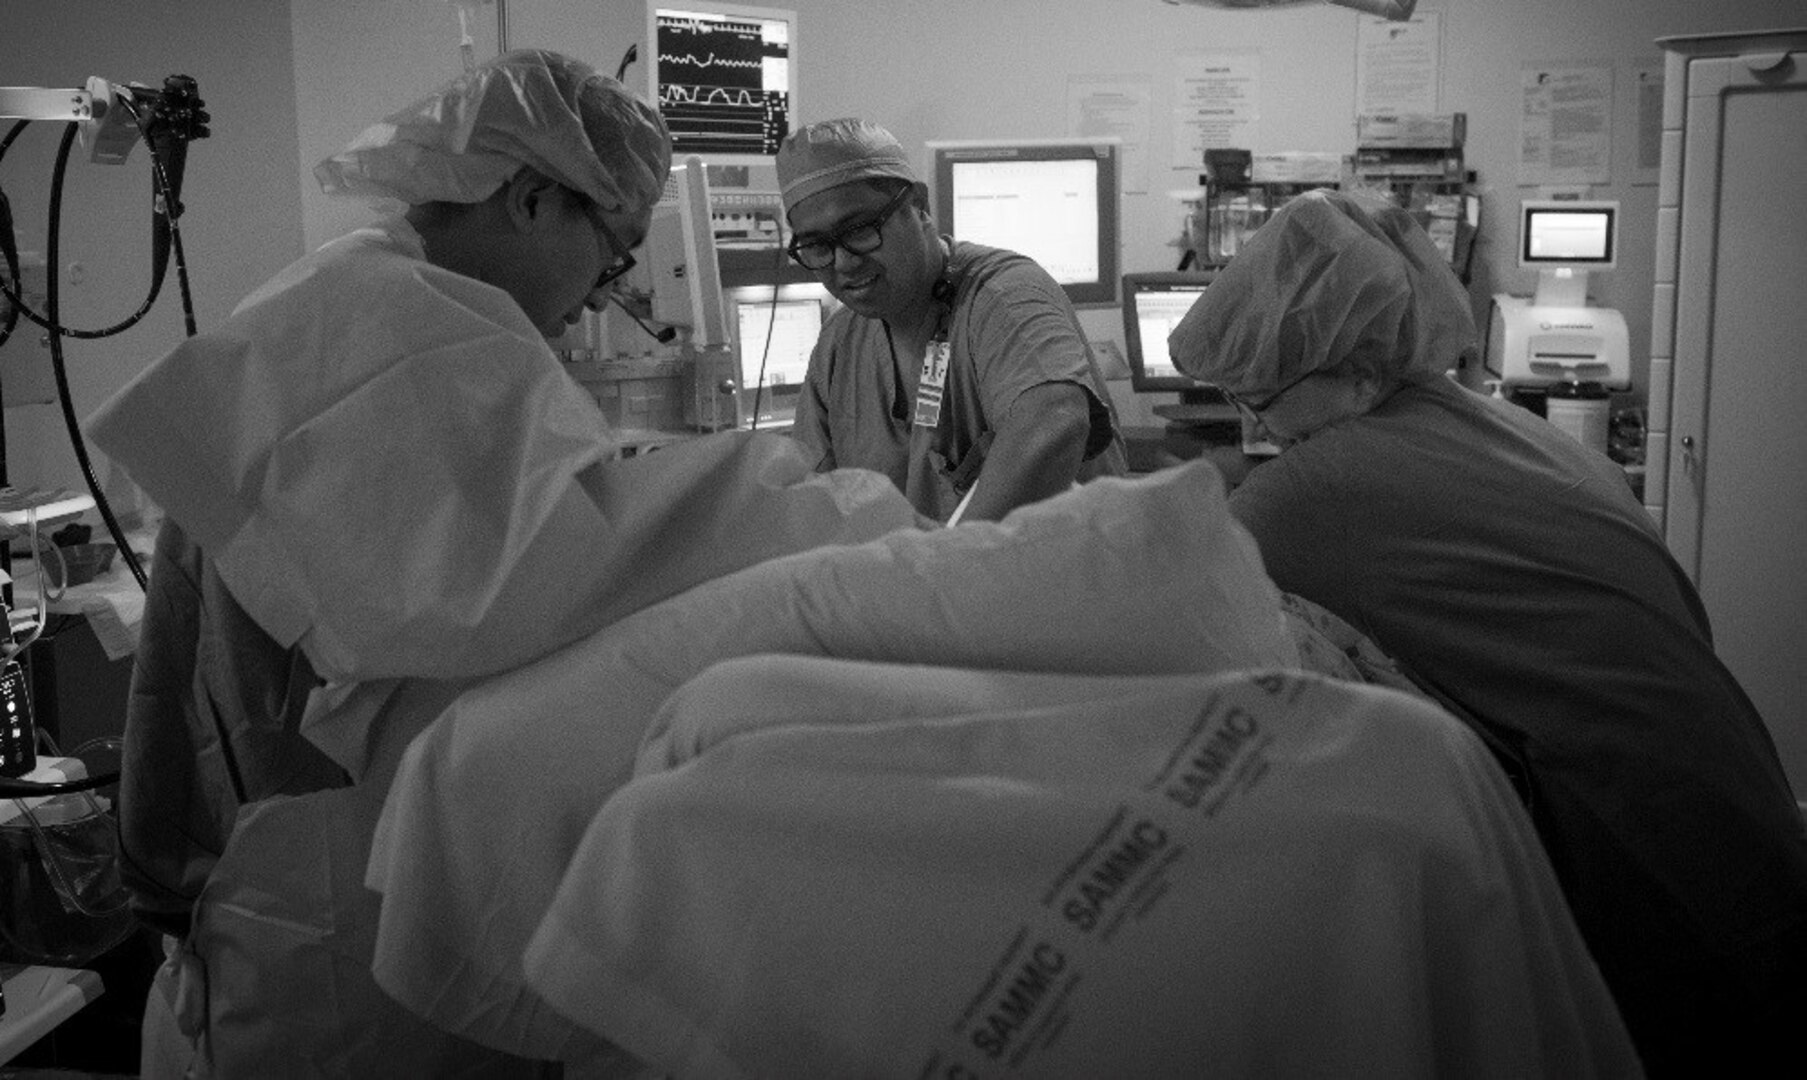 Surgical technicians from the 59th Medical Wing, prepare a patient for a colonoscopy, January 10, 2017 at Joint Base San Antonio-Lackland, Texas. The can provide patients timely screenings to detect gastro related illnesses, including cancer.